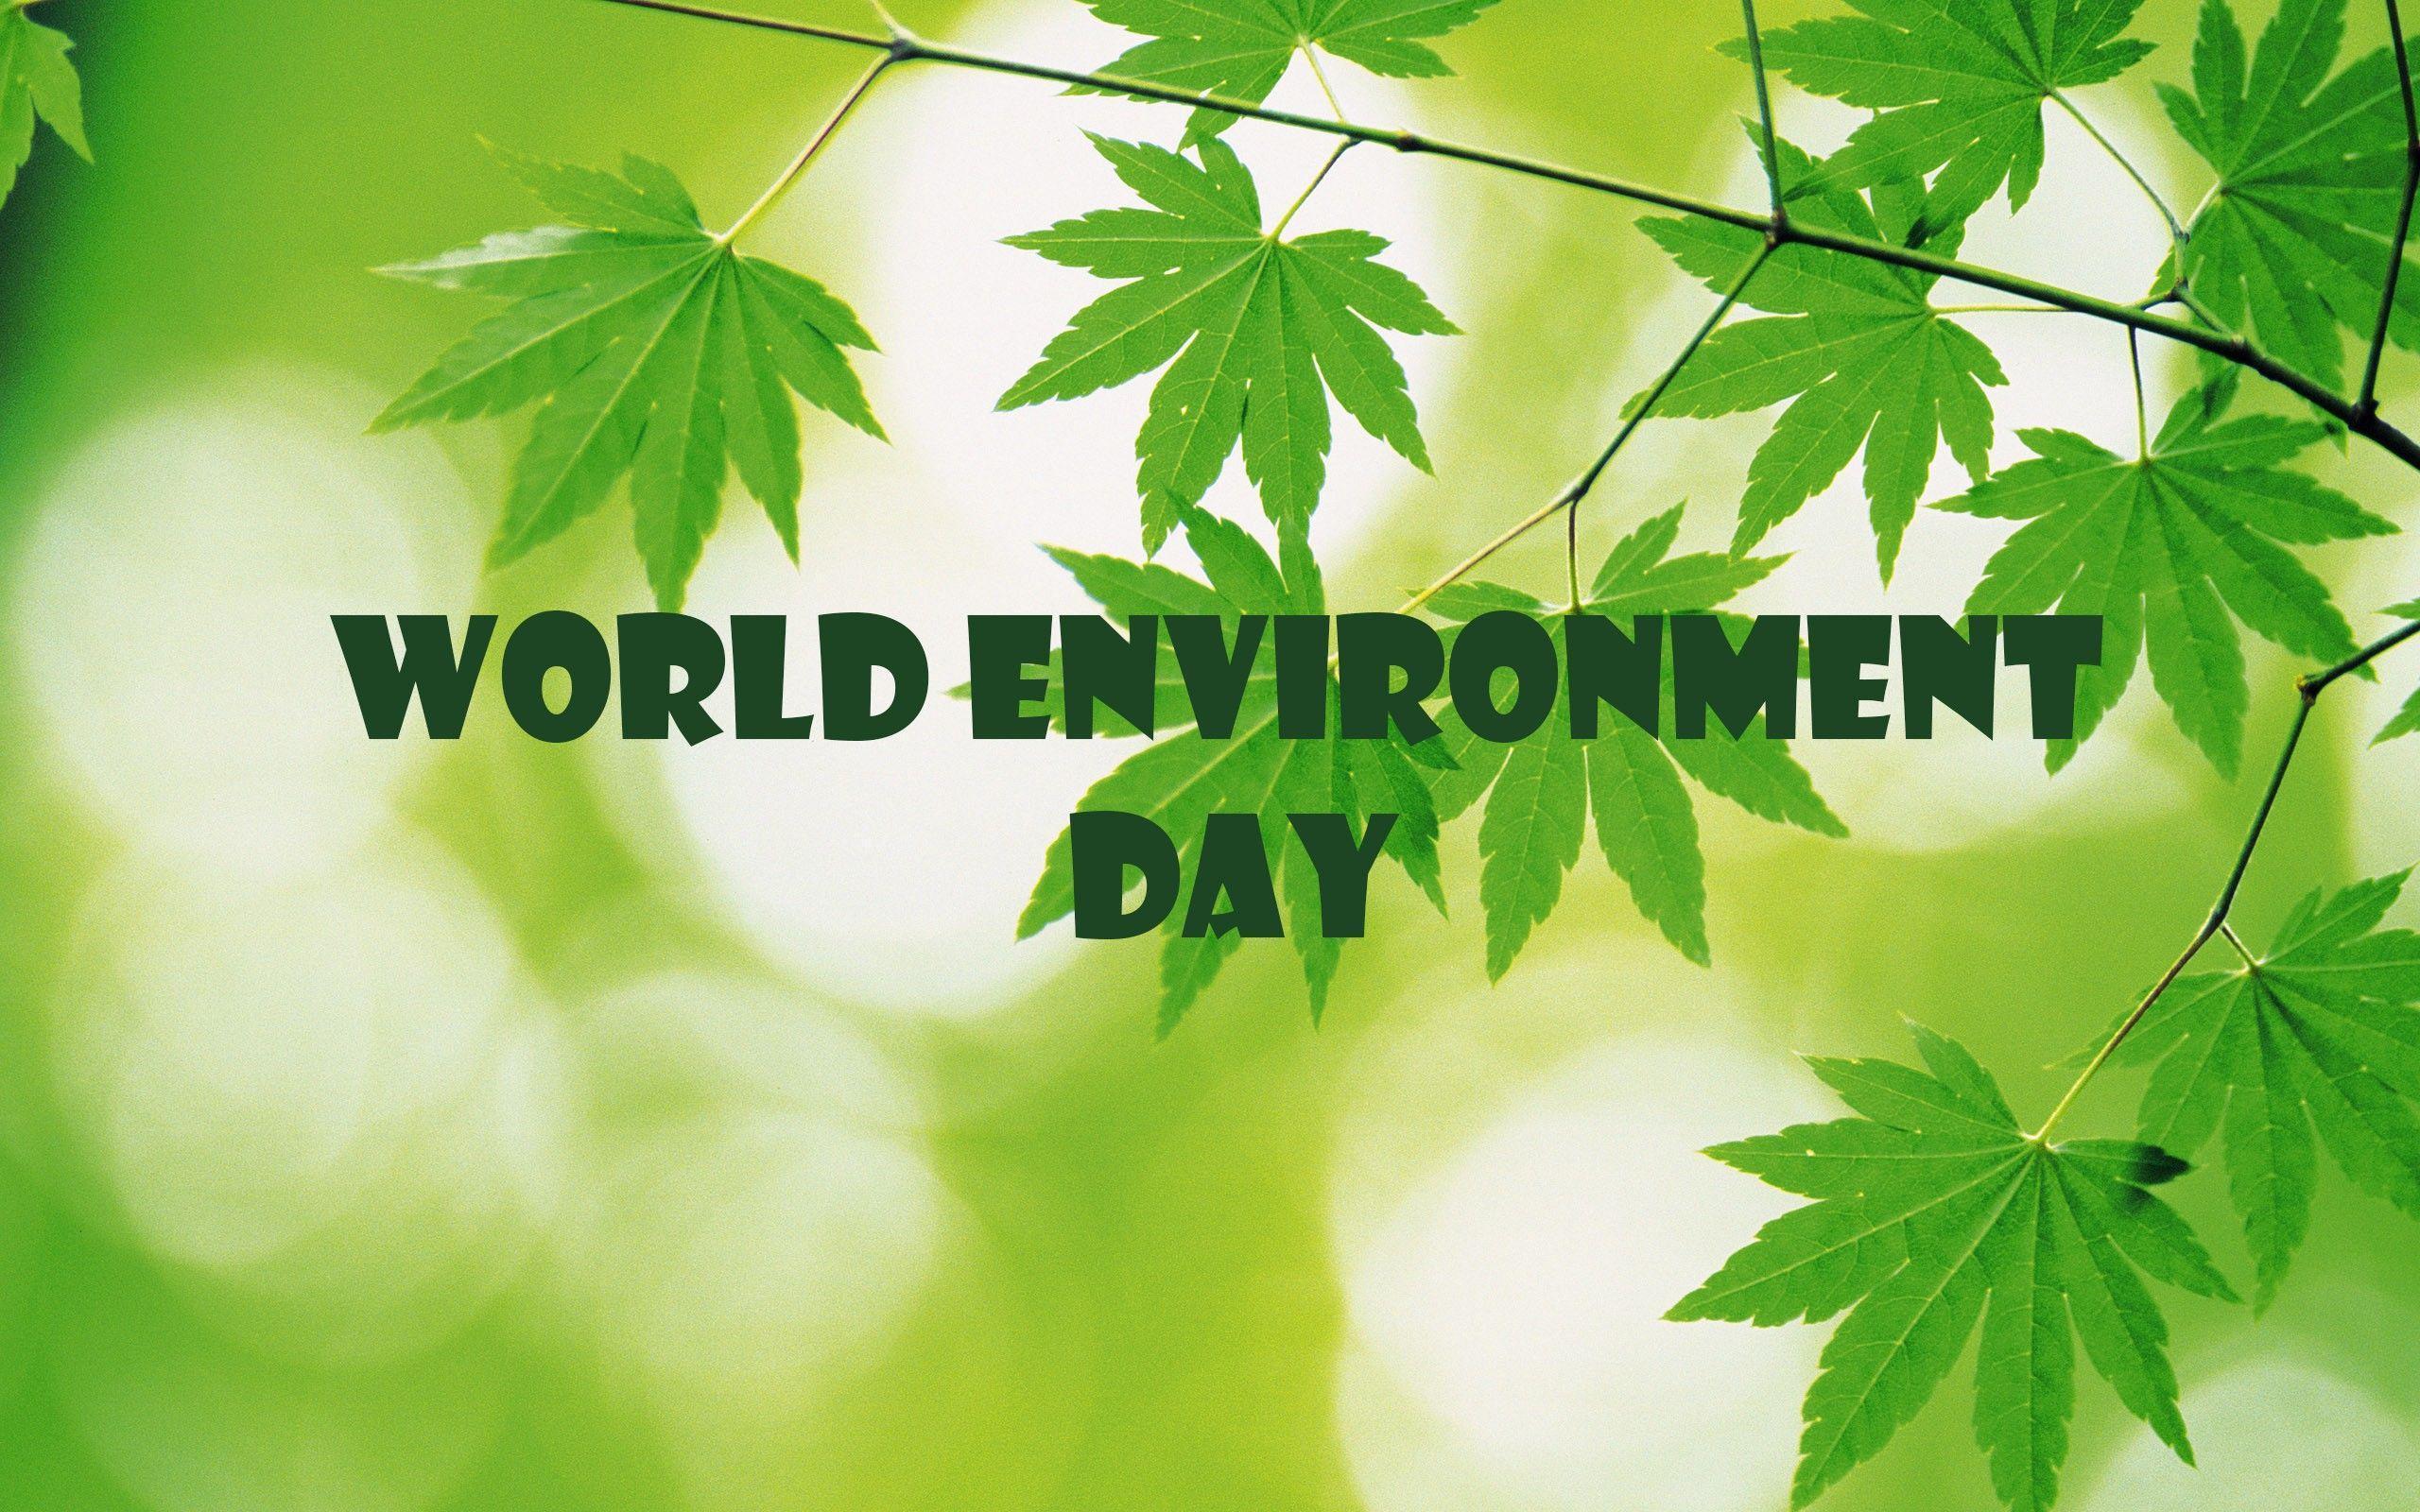 Environment Day Wallpaper Free Download